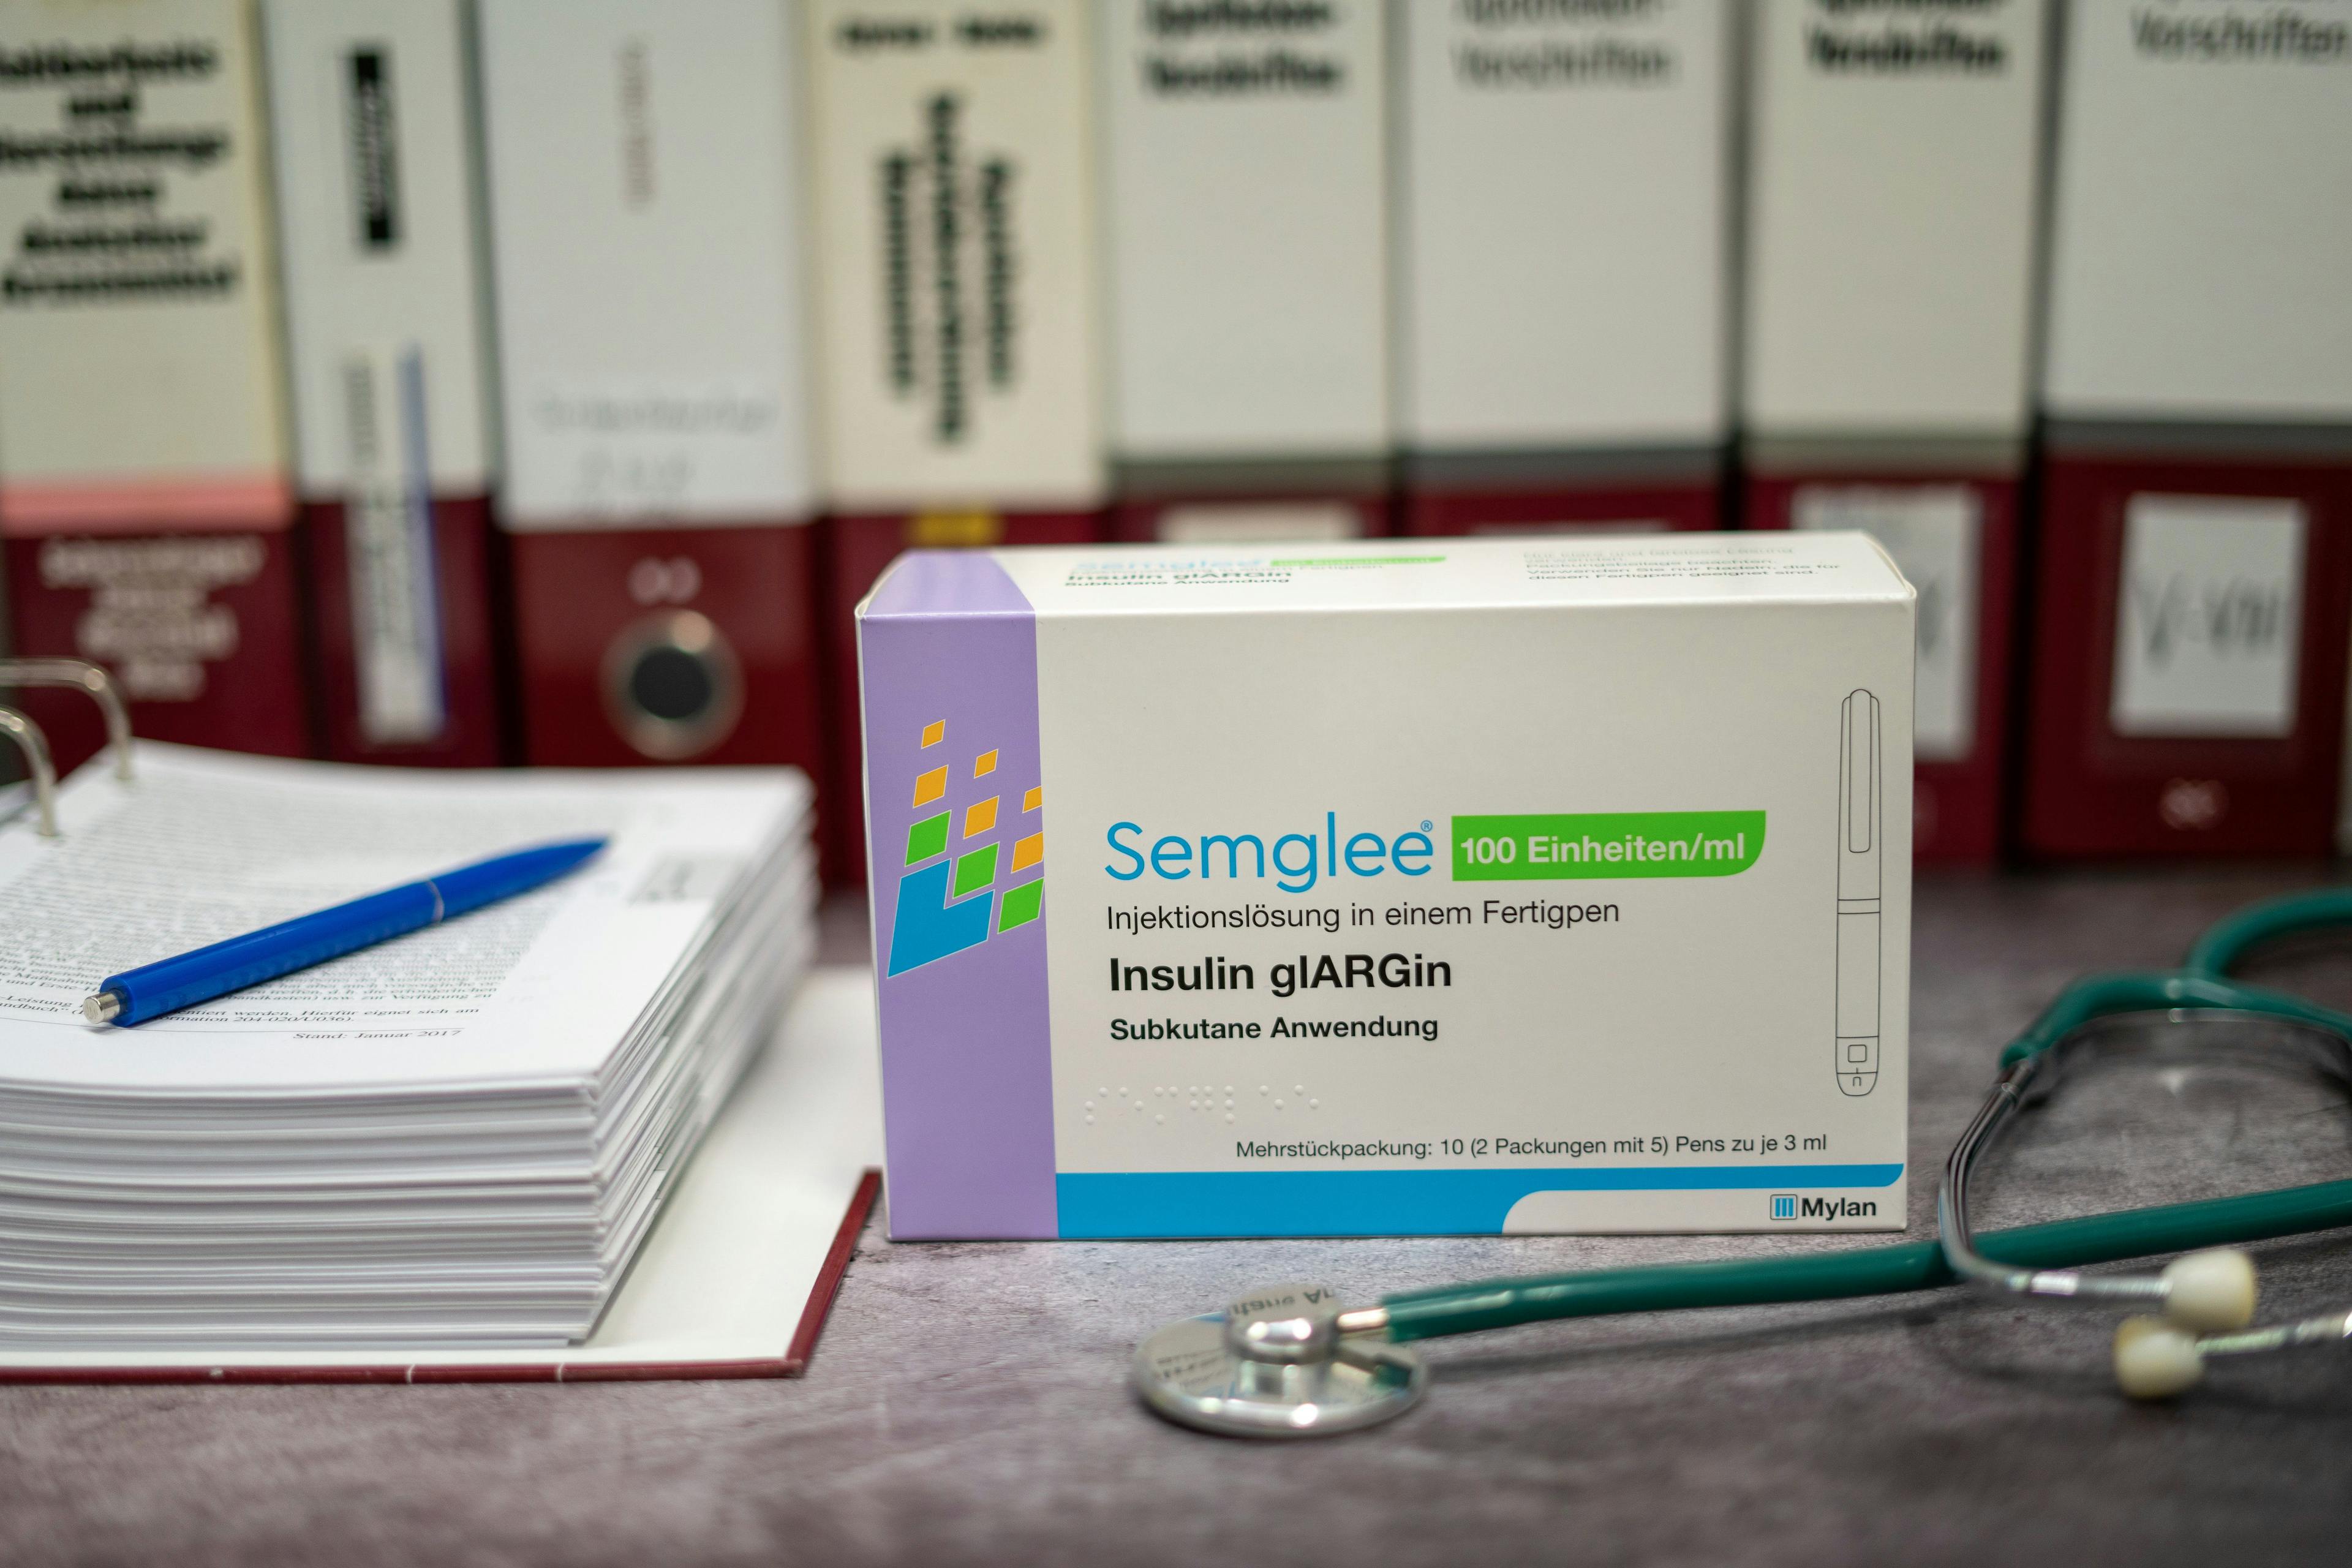 Semglee a drug containing the first interchangeable biosimilar product insulin glargine-yfgn approved in the U.S, for treatment of diabetes.